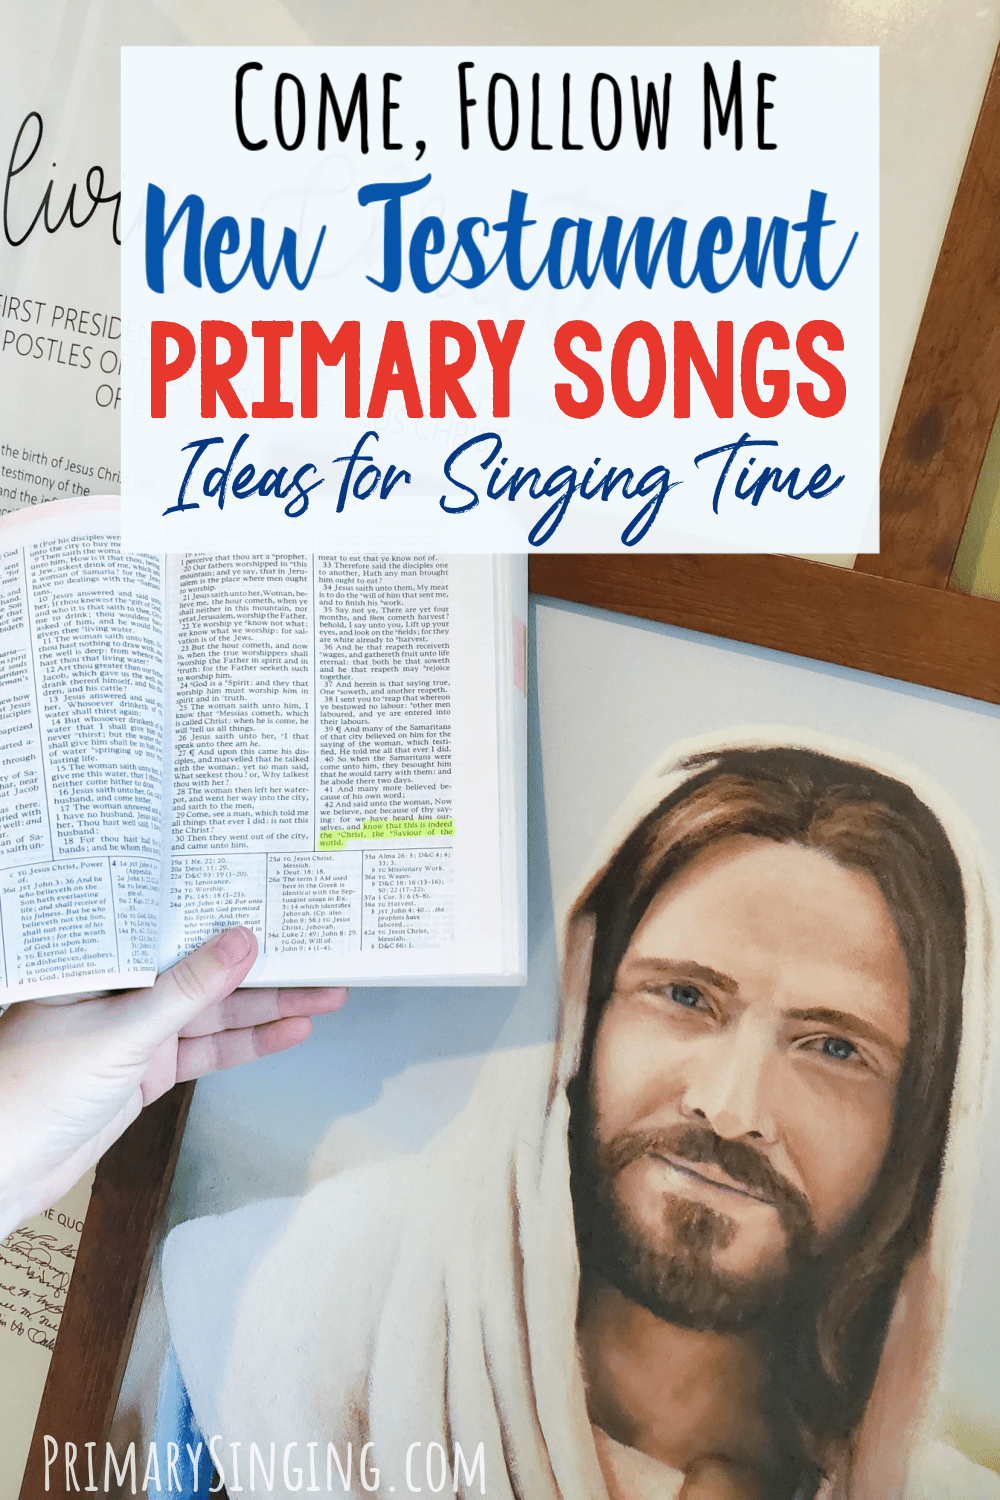 2023 LDS Primary Songs New Testament Come Follow Me song list and hundreds of singing time ideas for the monthly songs! A go-to resource for LDS Primary Music Leaders Singing Time must-have!